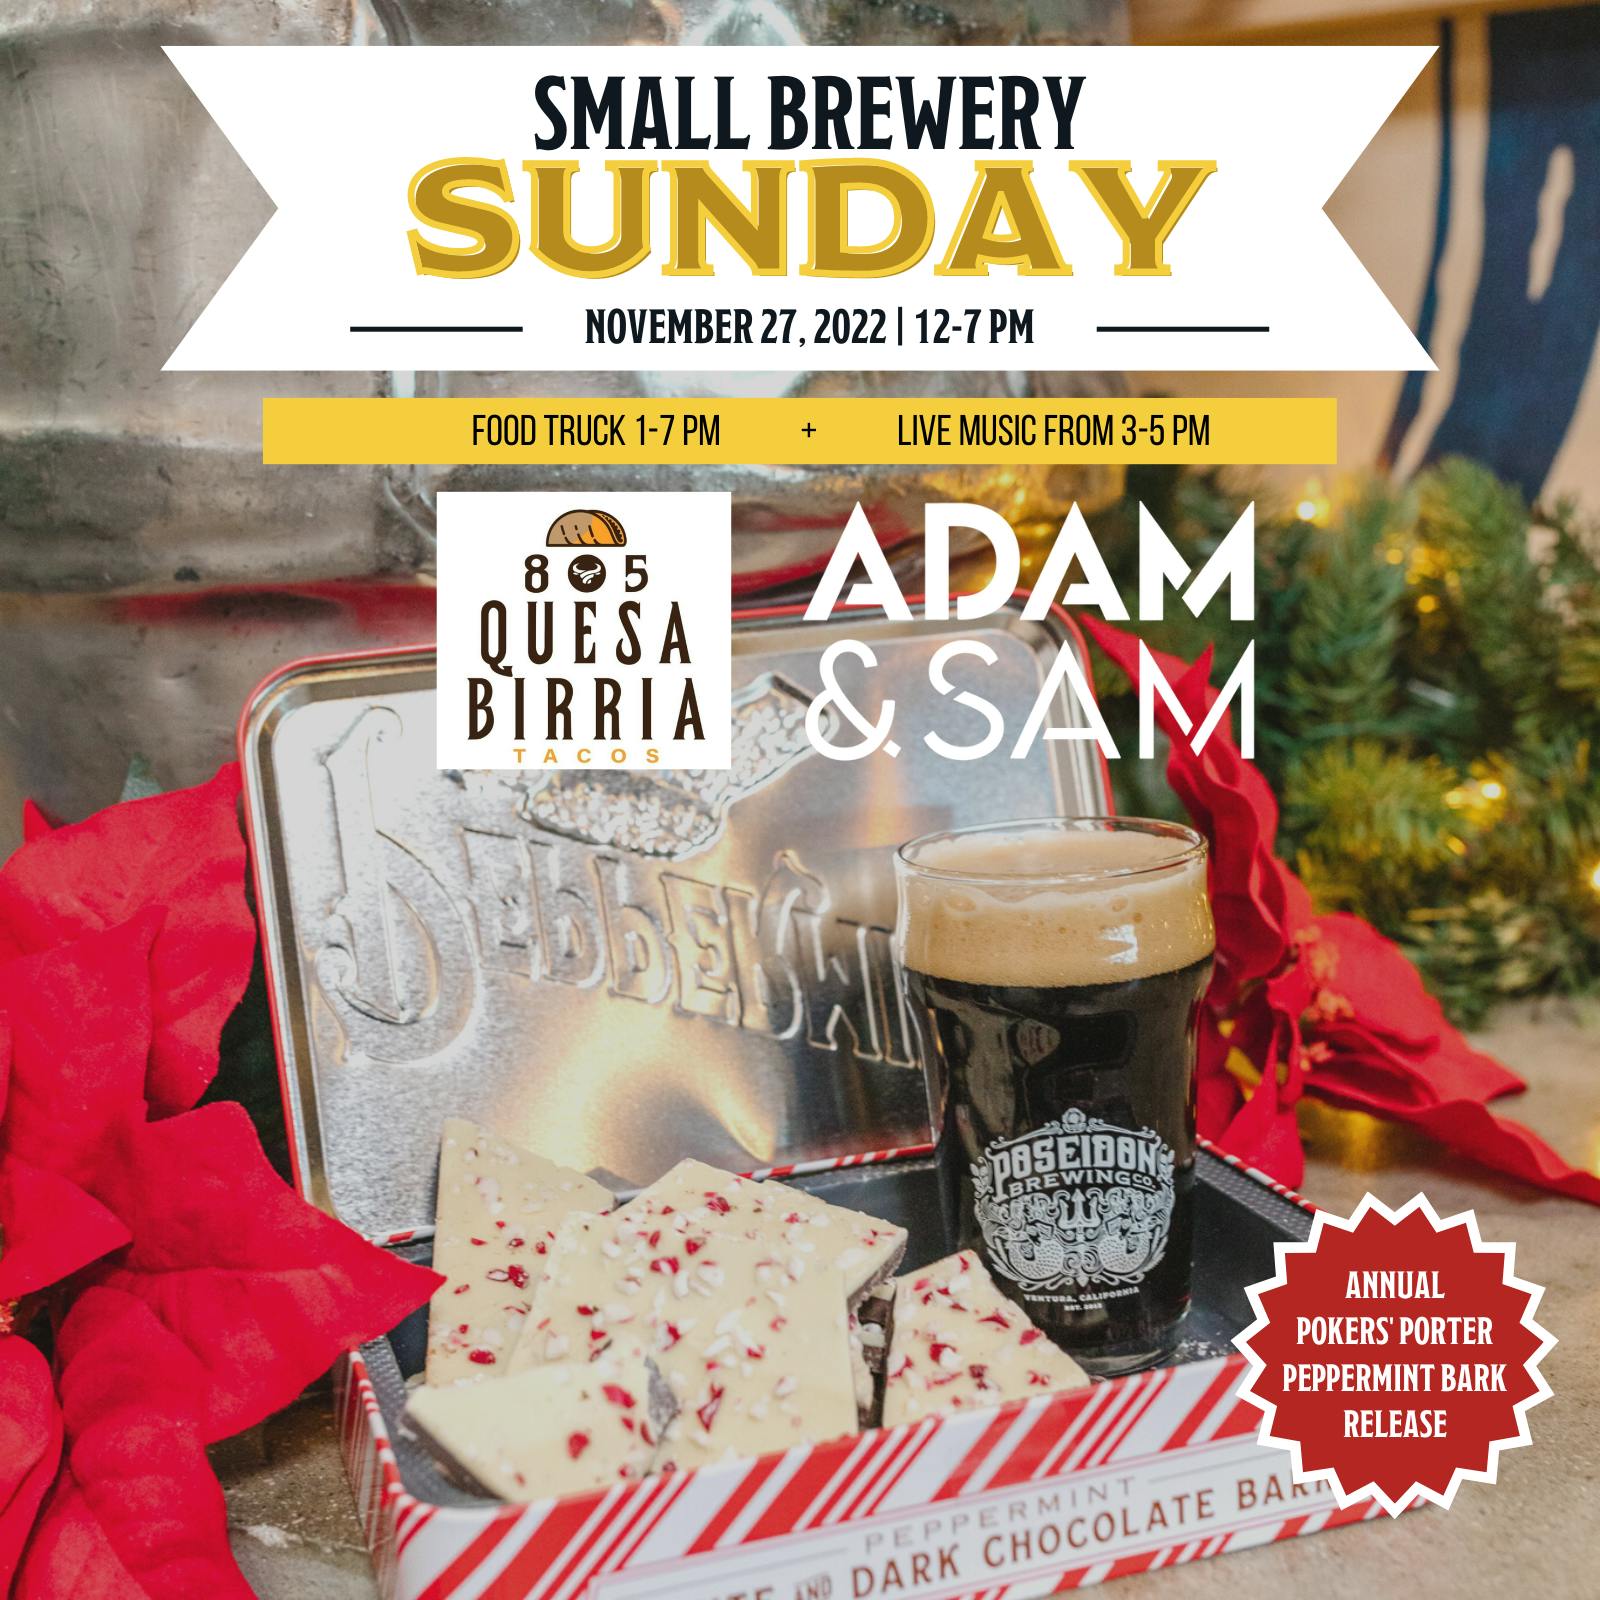 SMALL BREWERY SUNDAY 2022 (EVENT)